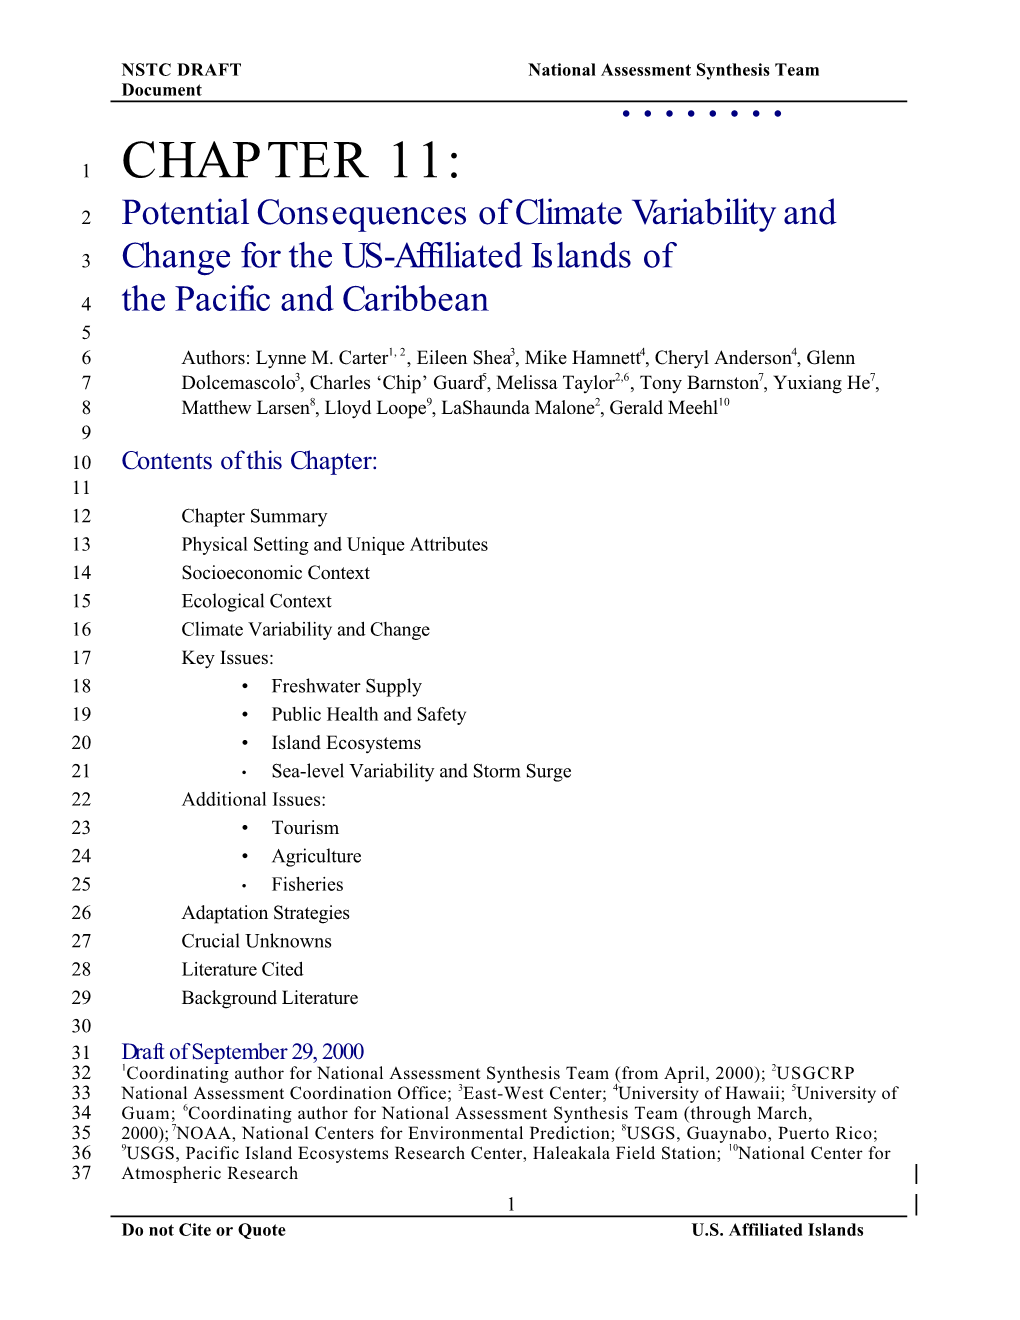 Chapter 11: Potential Consequences of Climate Variability and Change For